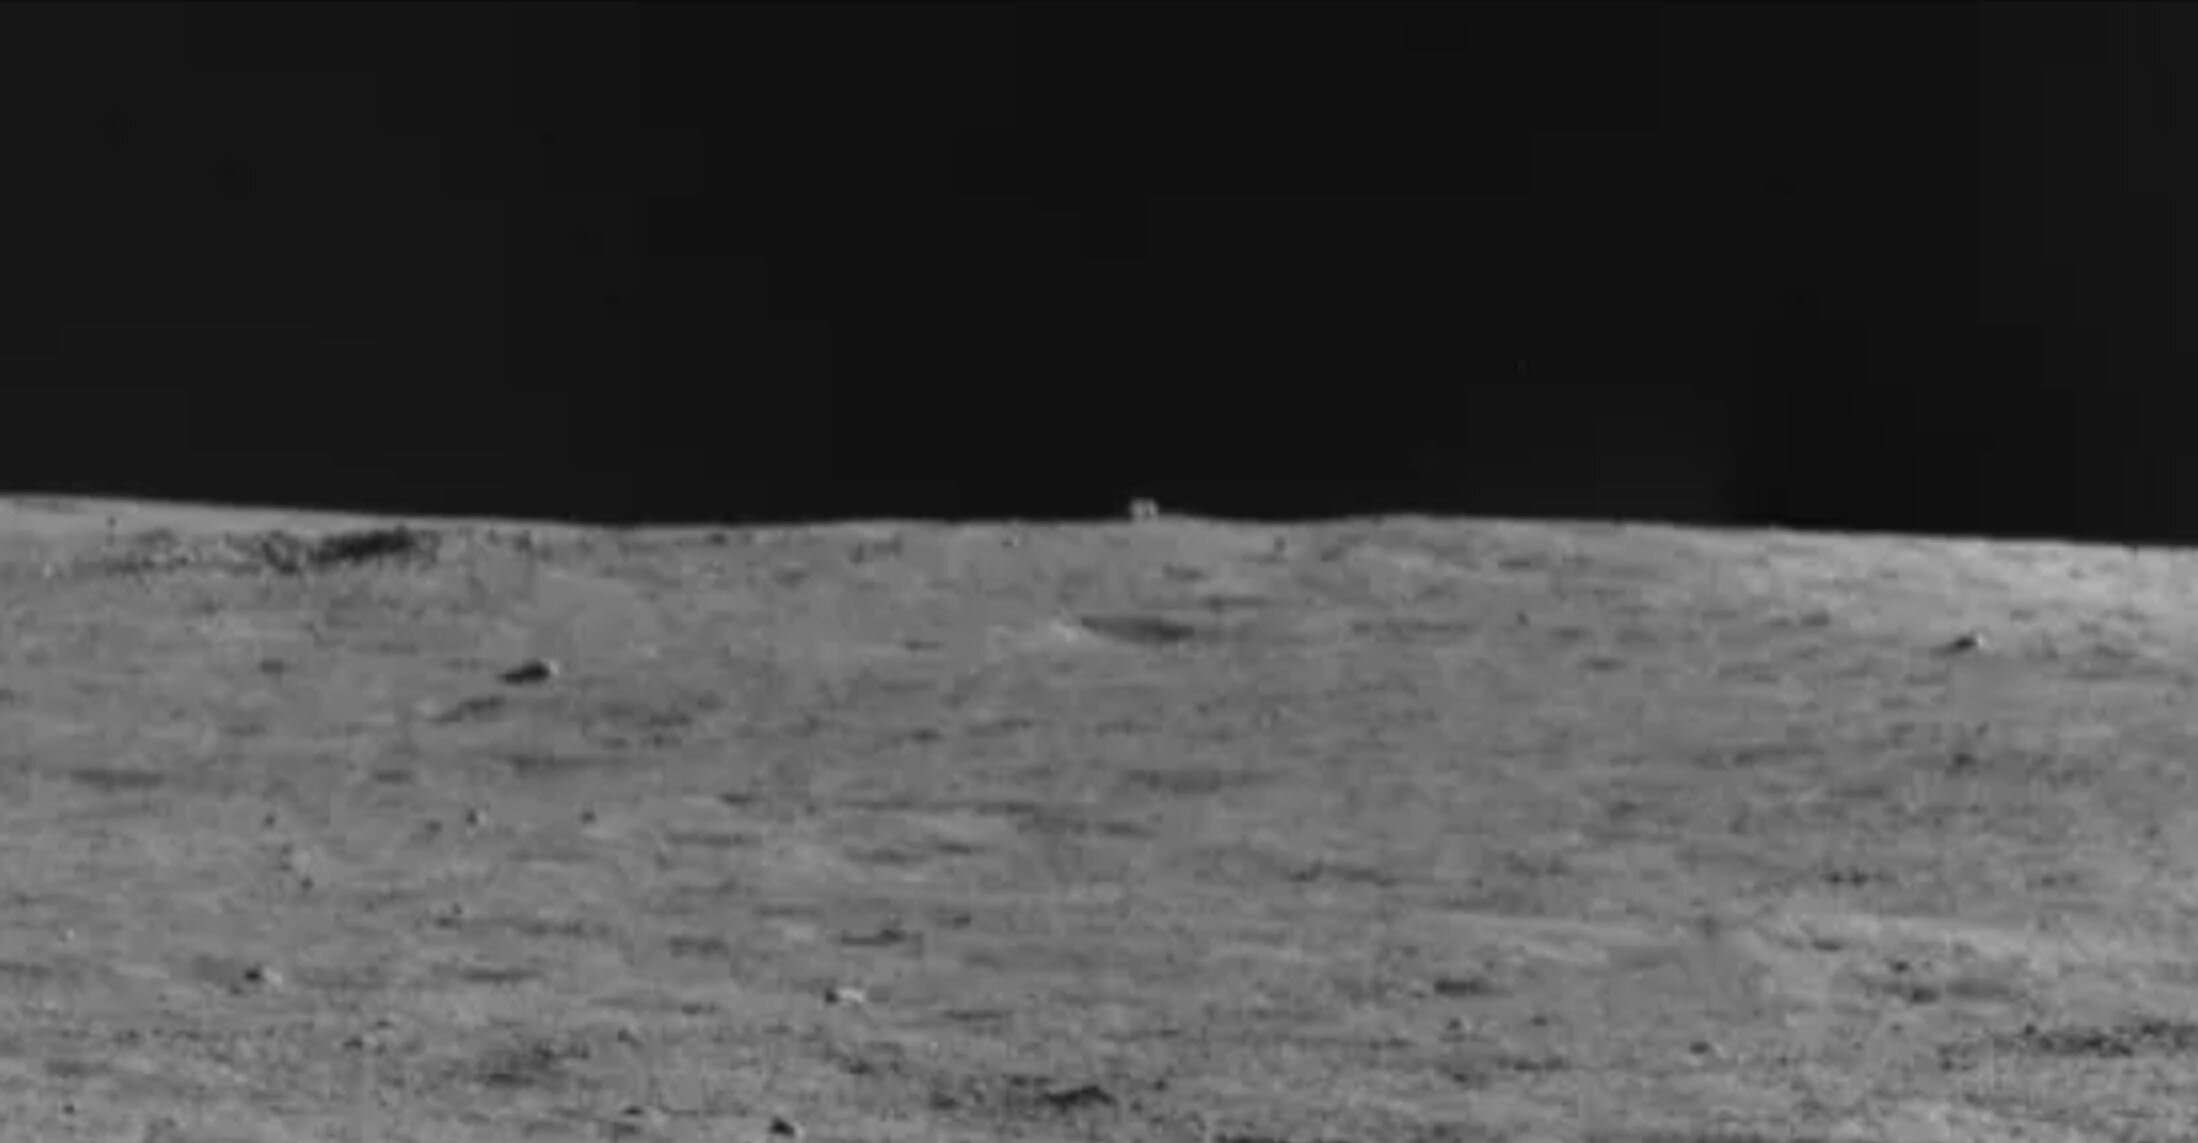 Here is the full-size image of the mysterious object on the Moon. Credit: CNSA